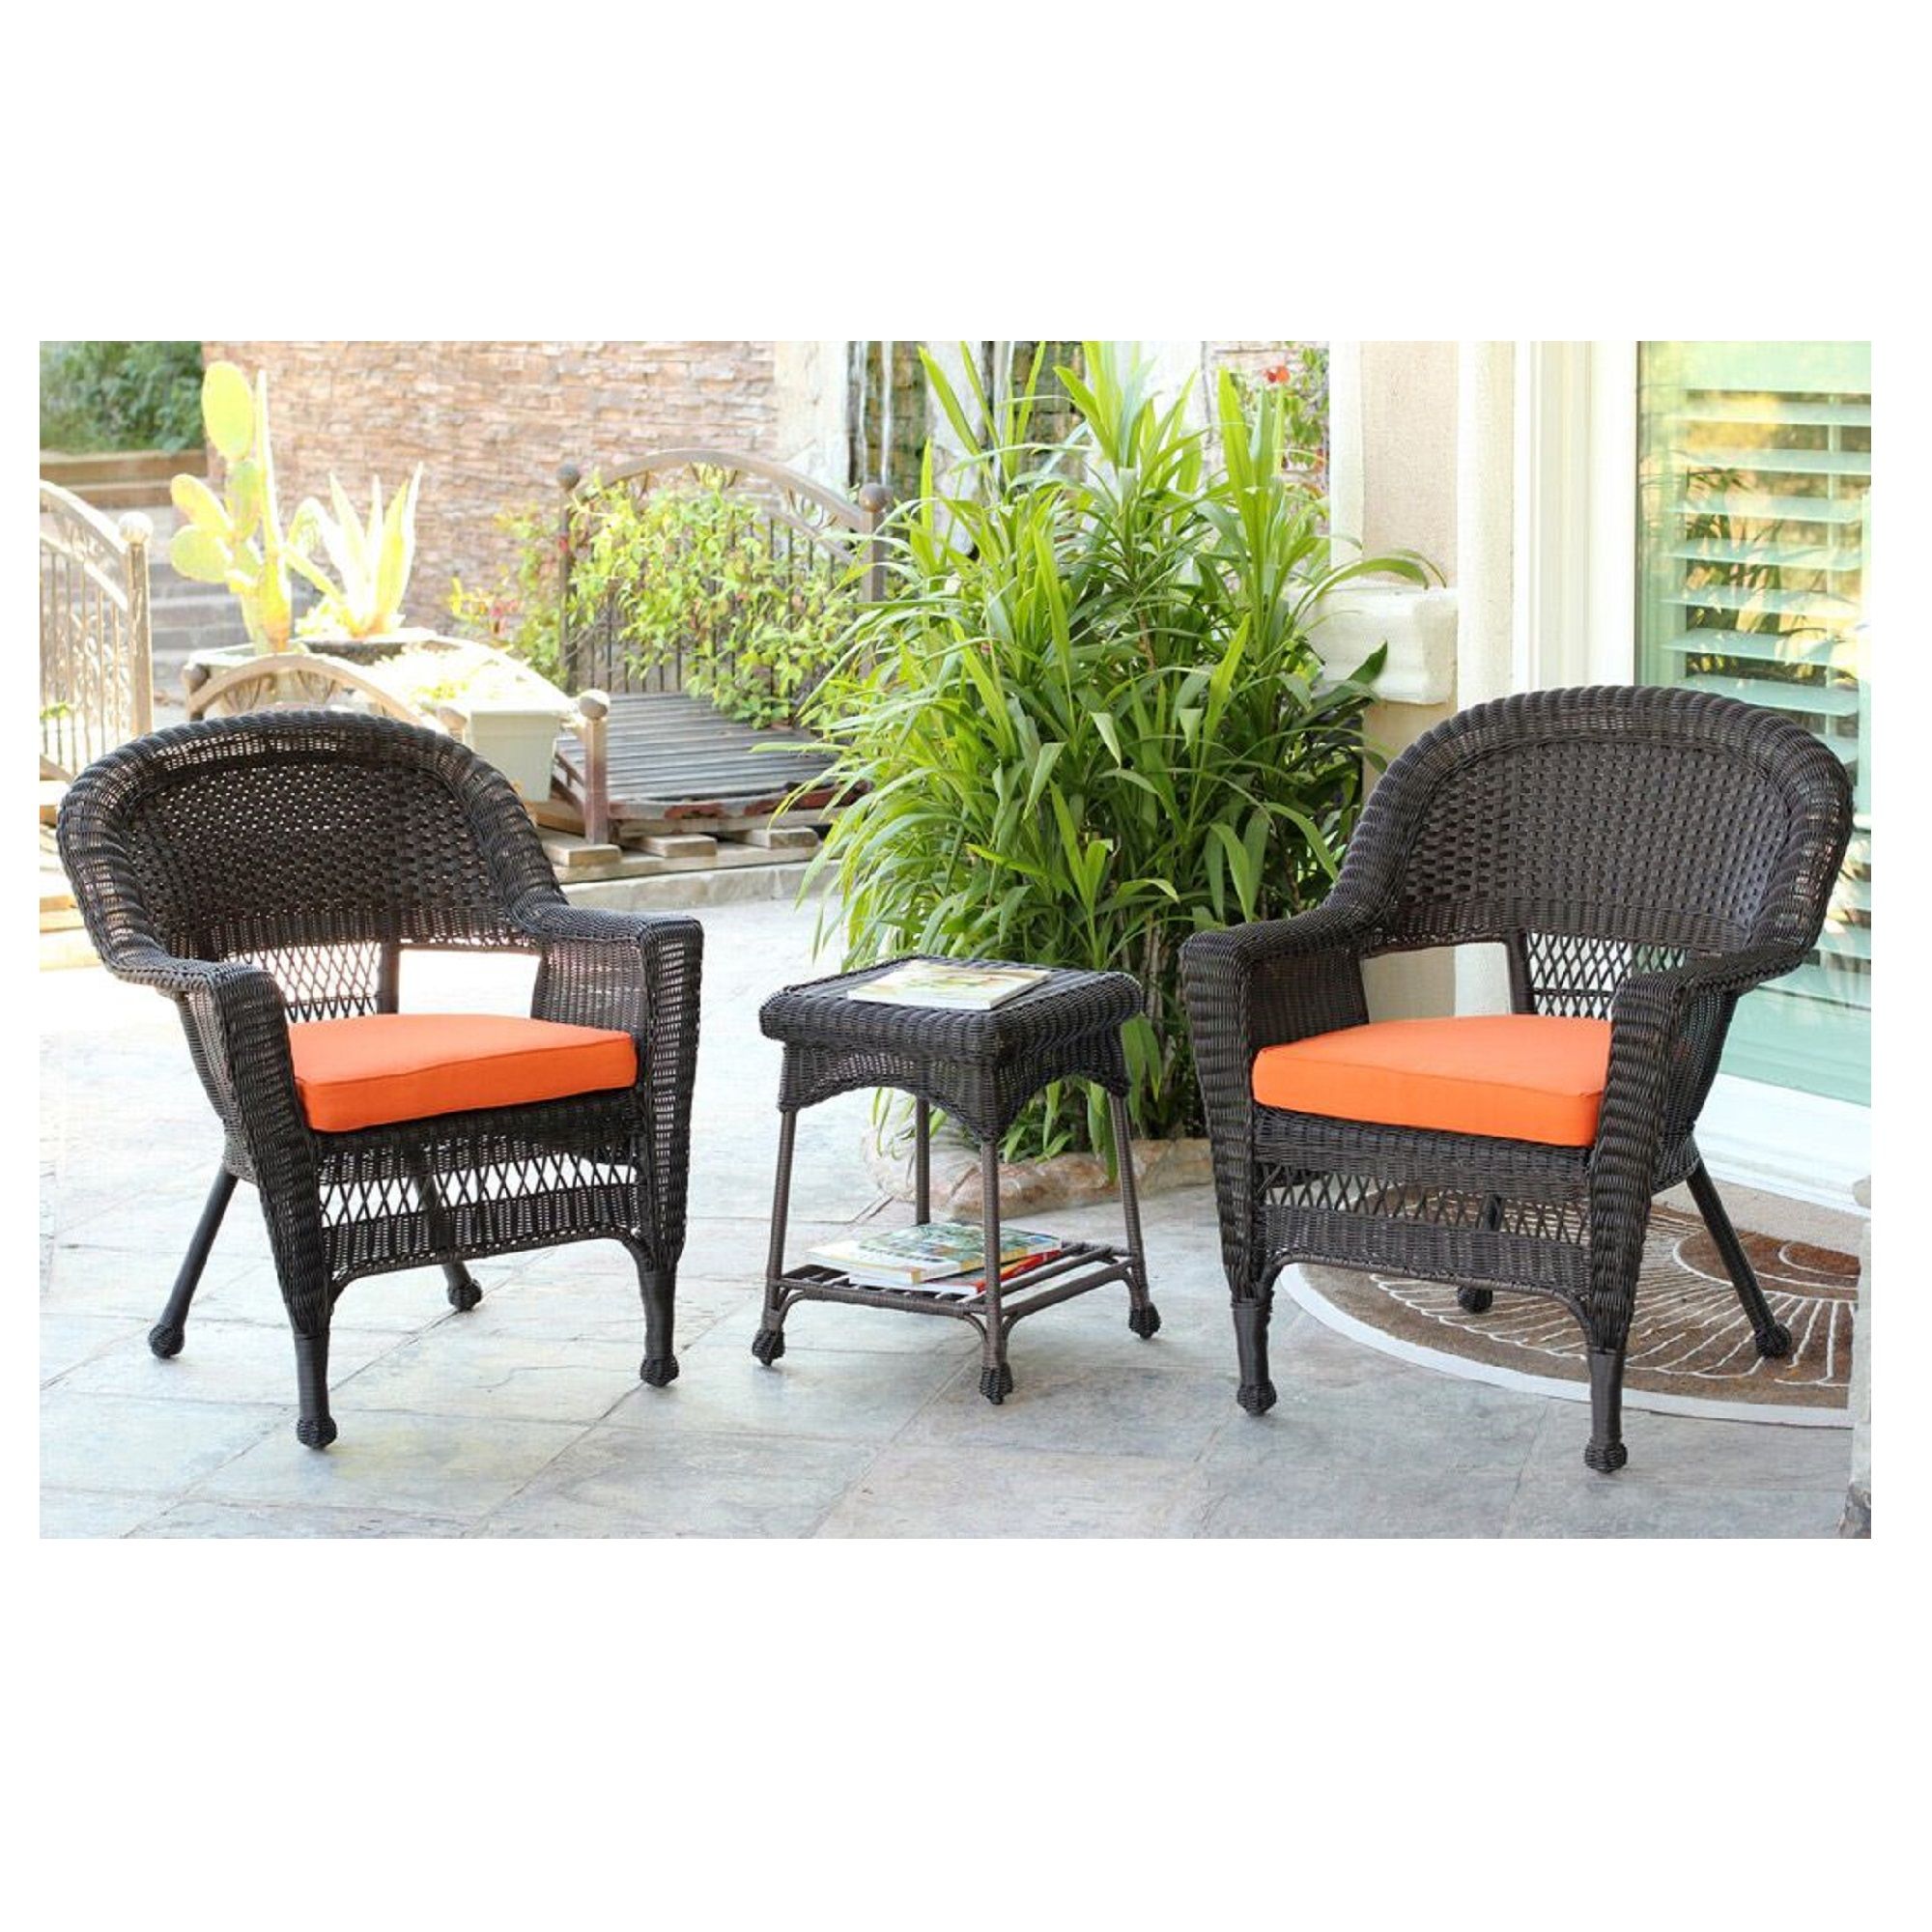 Set Of 3 Espresso Brown Resin Wicker Patio Chairs And End Table For Outdoor Wicker Orange Cushion Patio Sets (View 11 of 15)